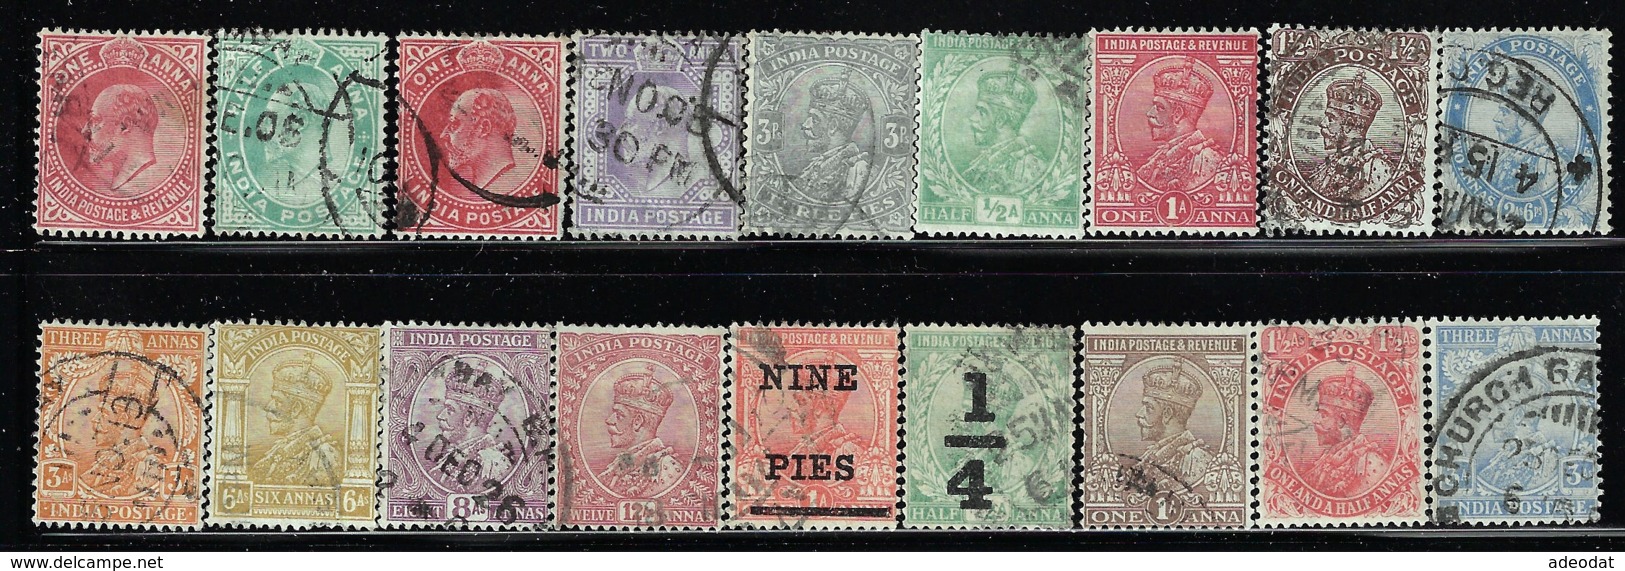 INDIA 1902-1906 SCOTT 61-63,79,89,102,104 CANCELLED CATALOG VALUE US $9.75 - Collections, Lots & Séries